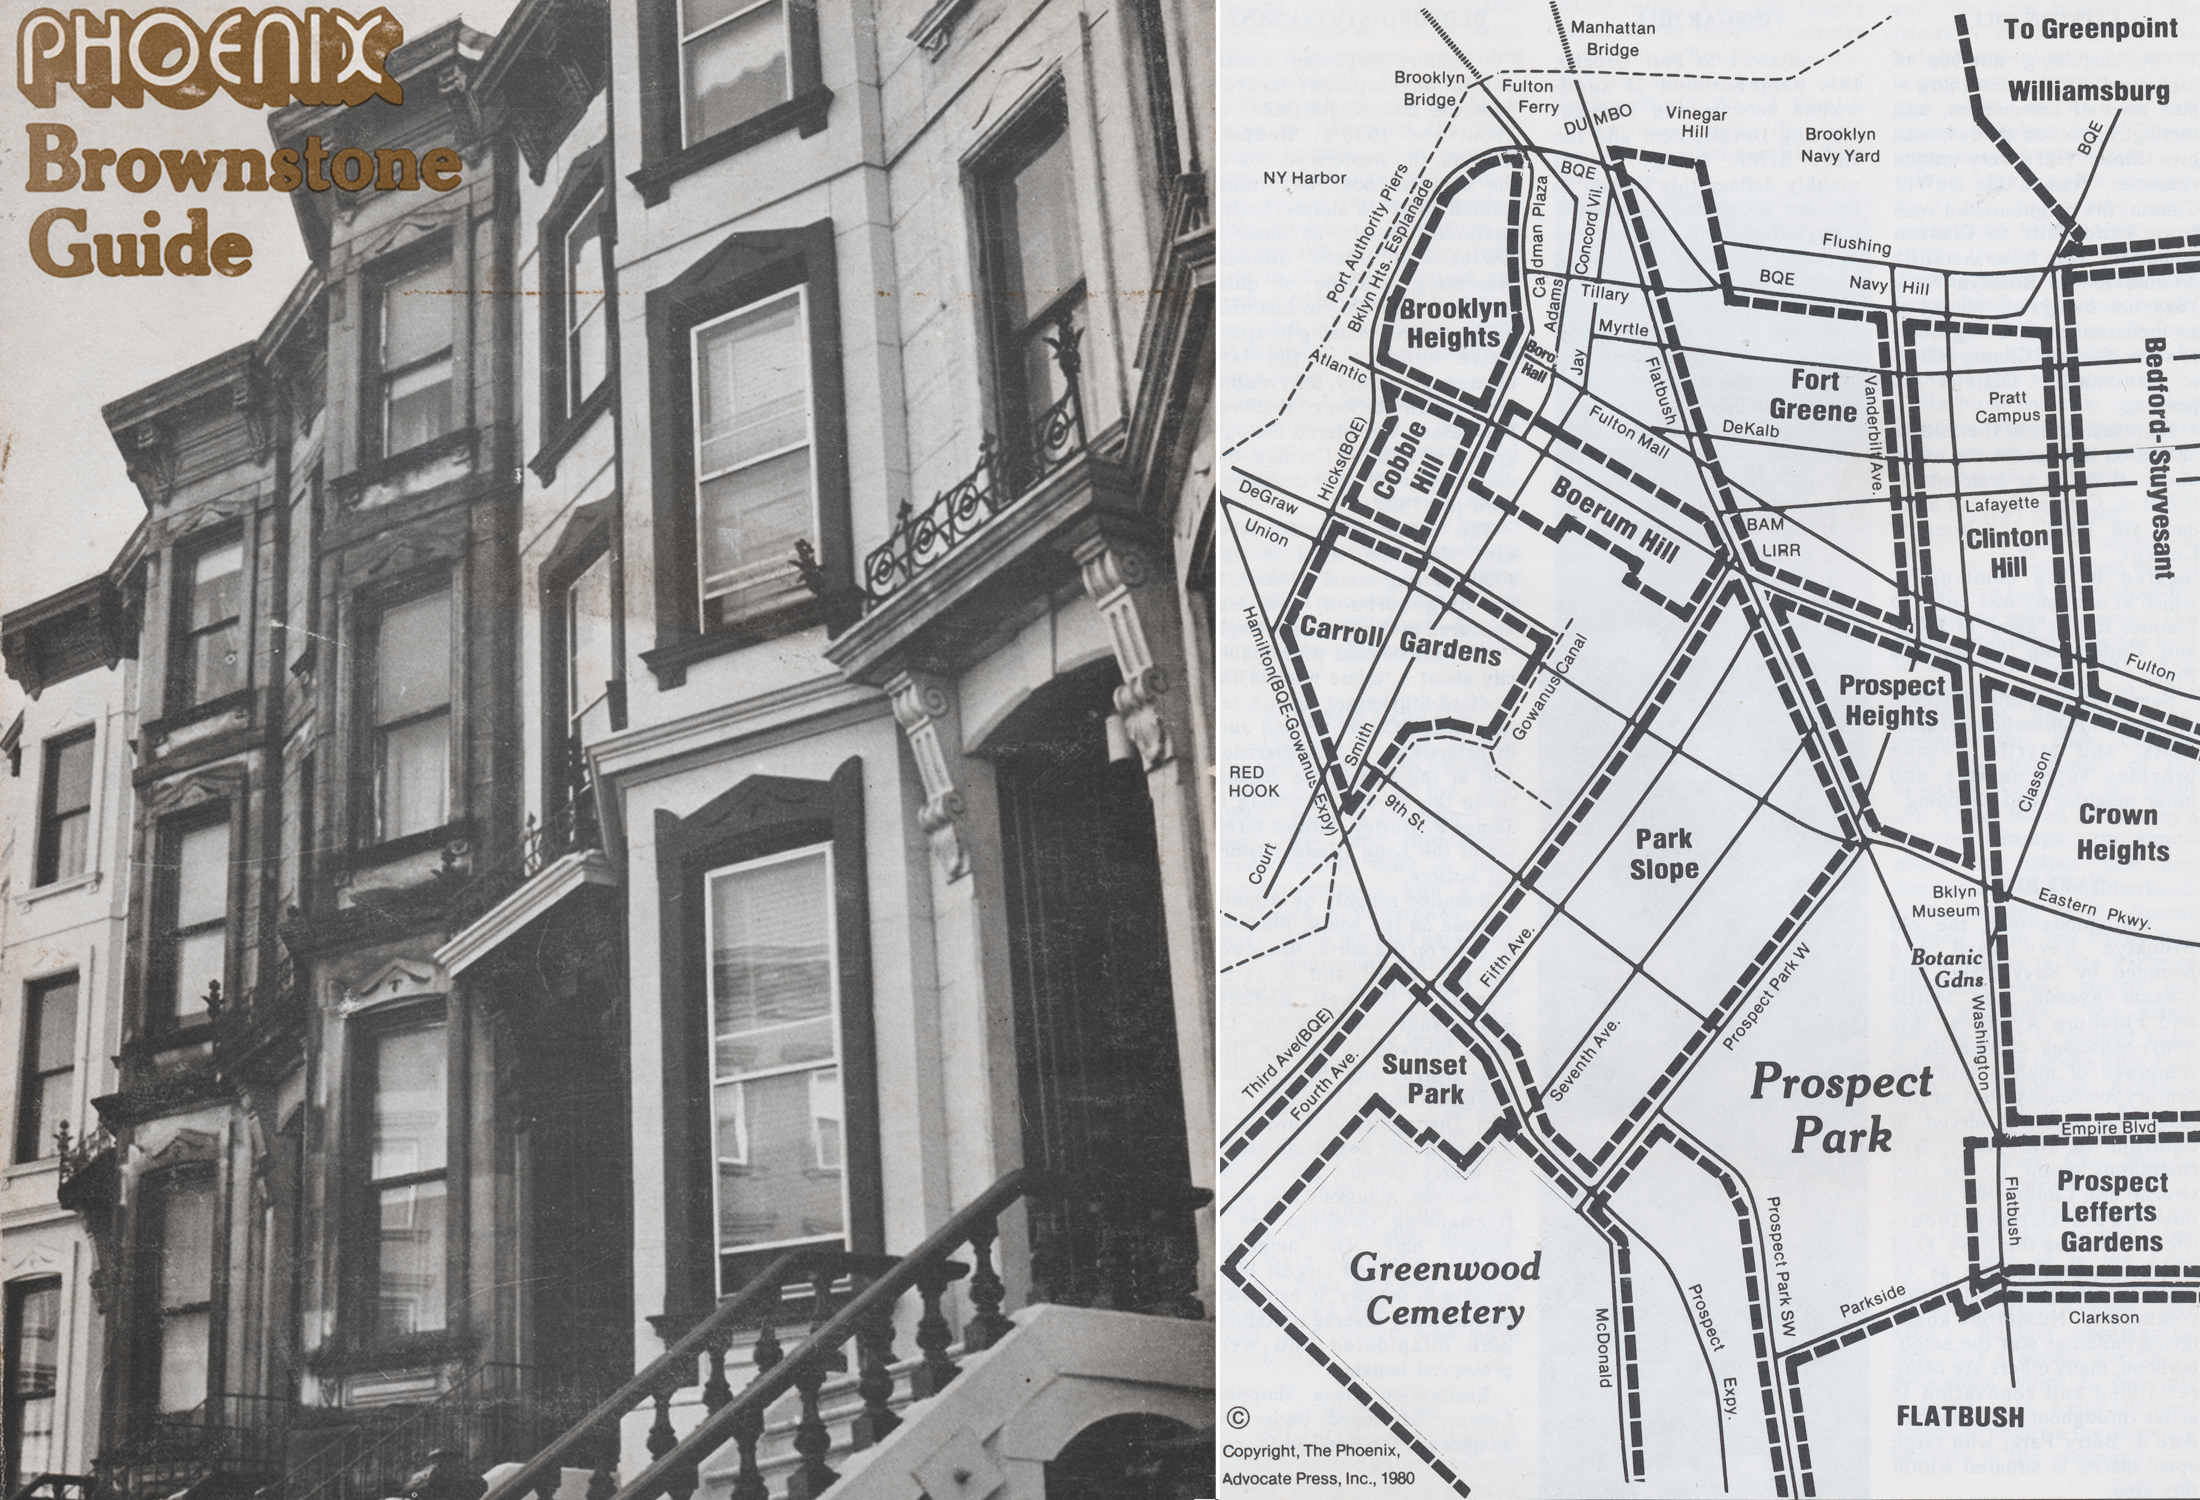 black and white cover of the book showing brownstones and a map of the borough